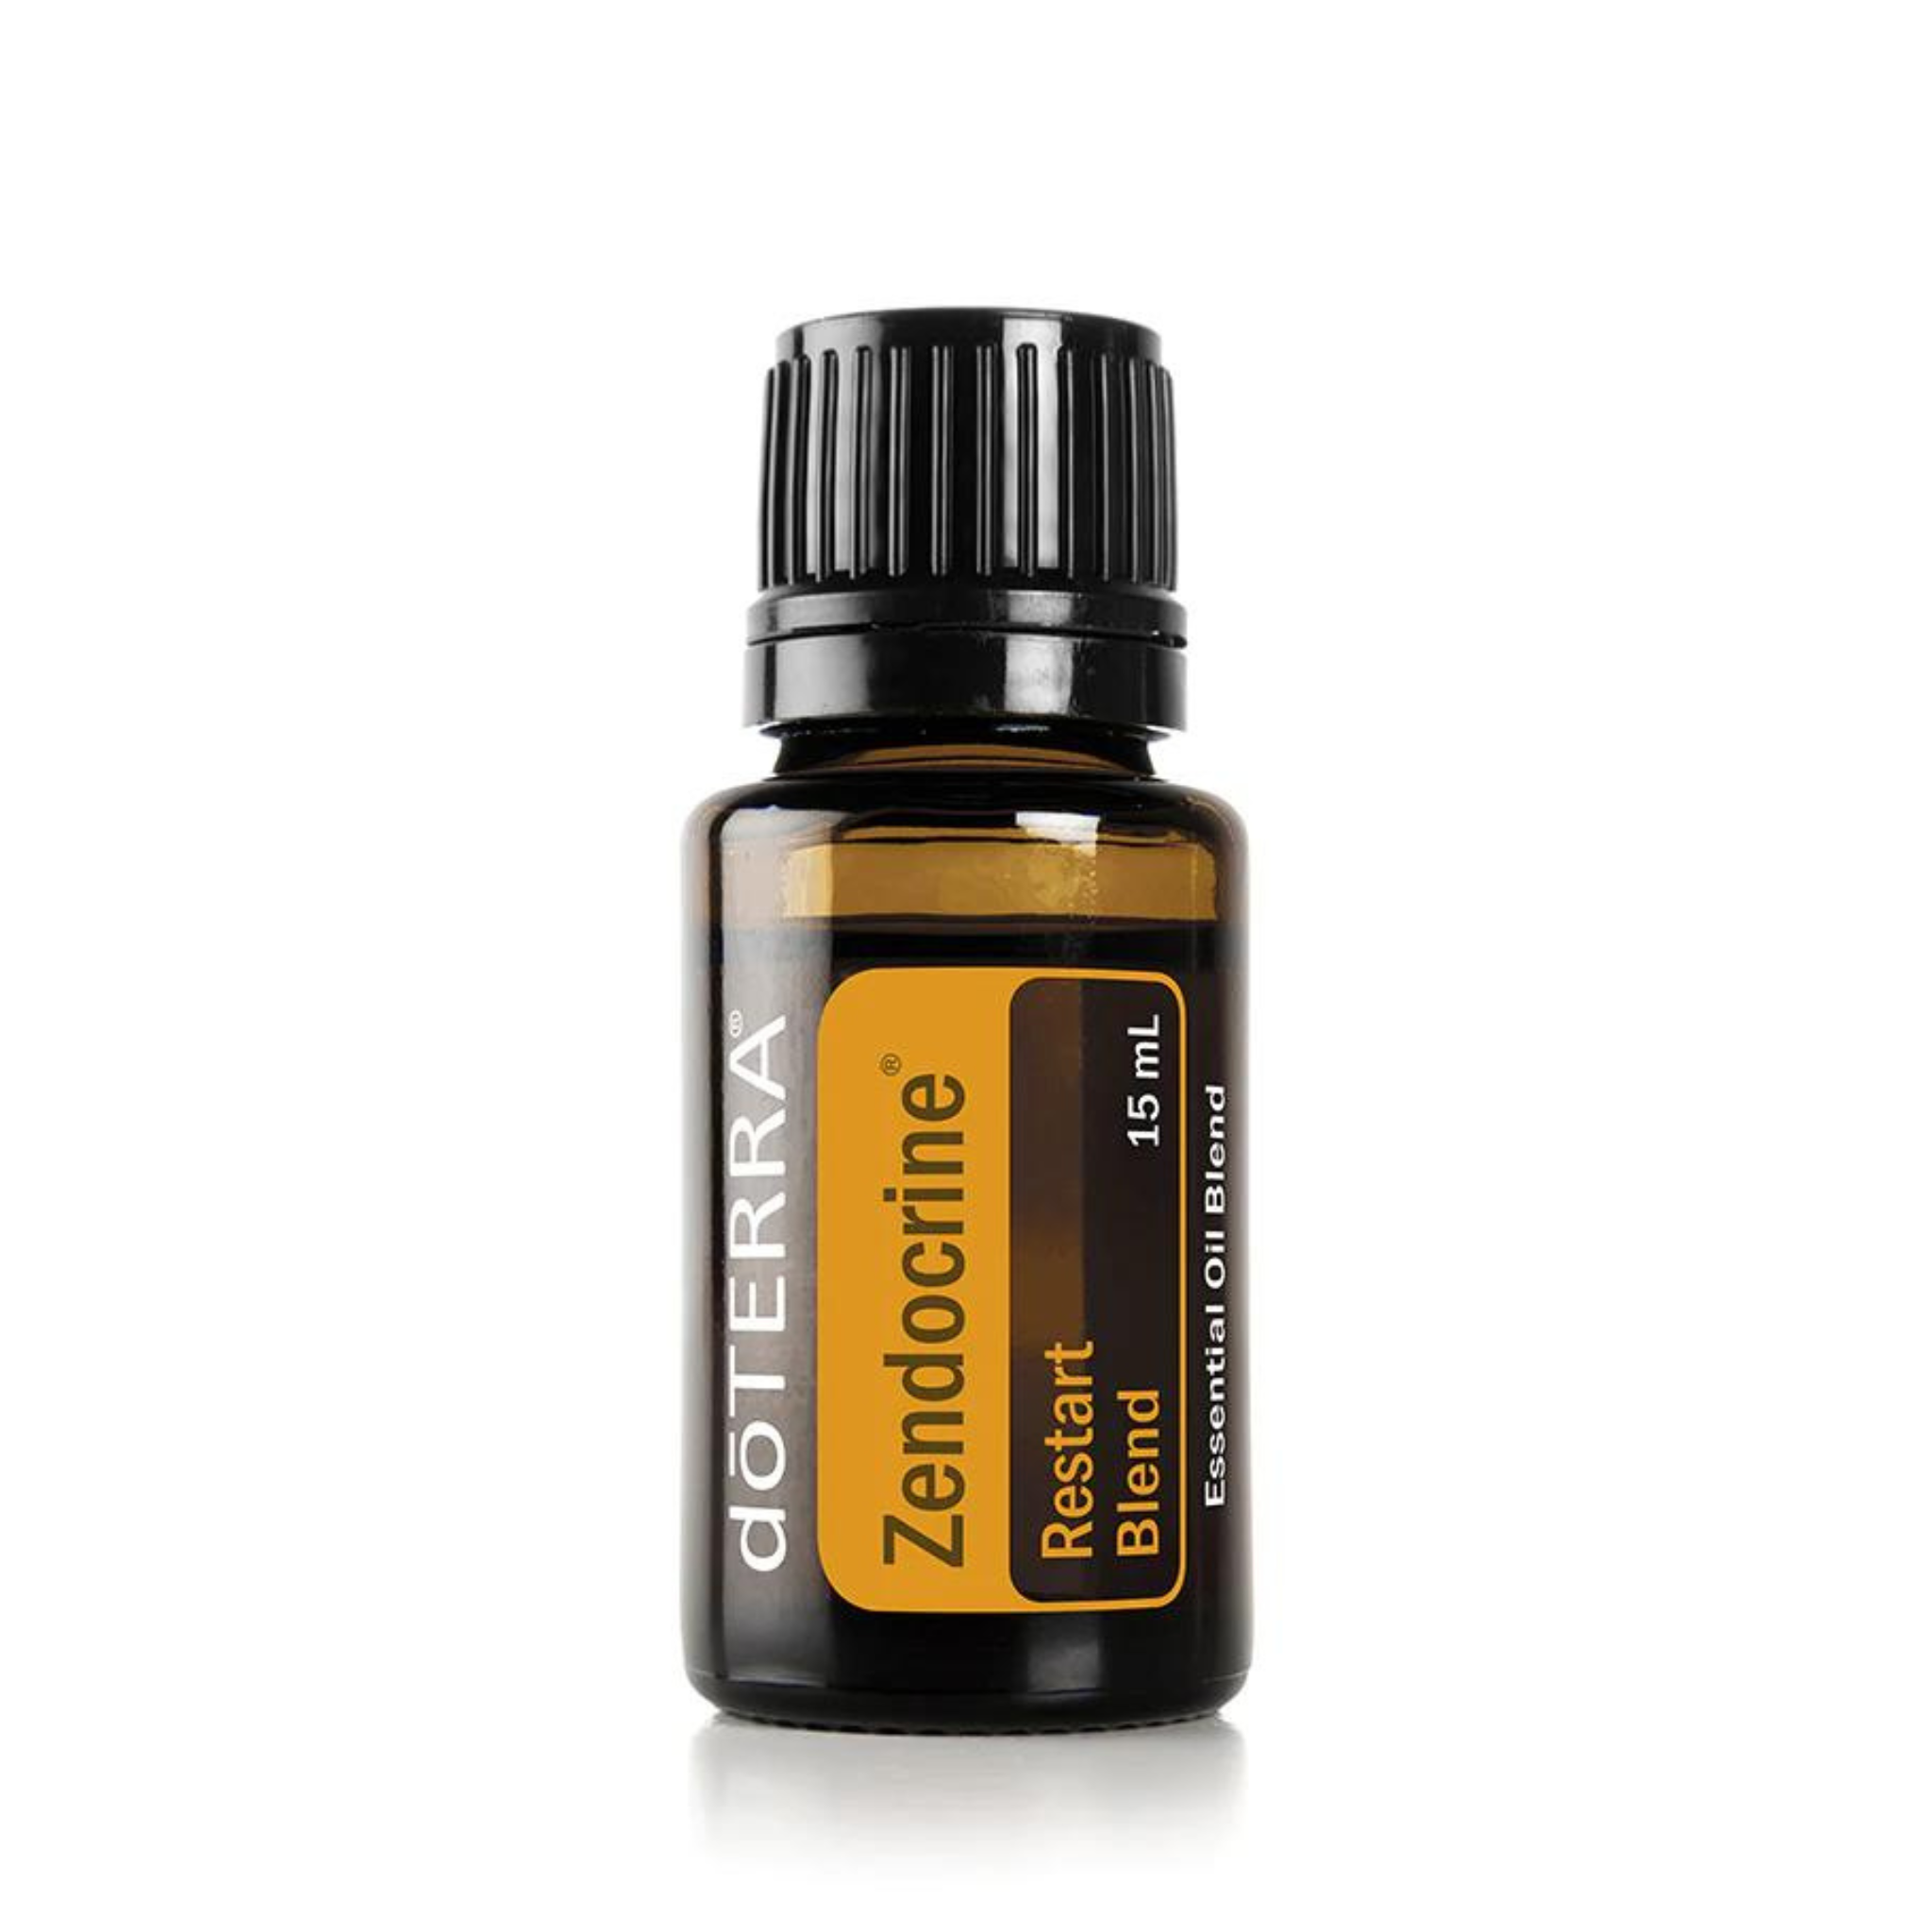 Doterra Zendocrine Essential Oil has a herbaceous, pungent, floral aroma. Glass bottle, Satin Sheen Gold label, 15 ml